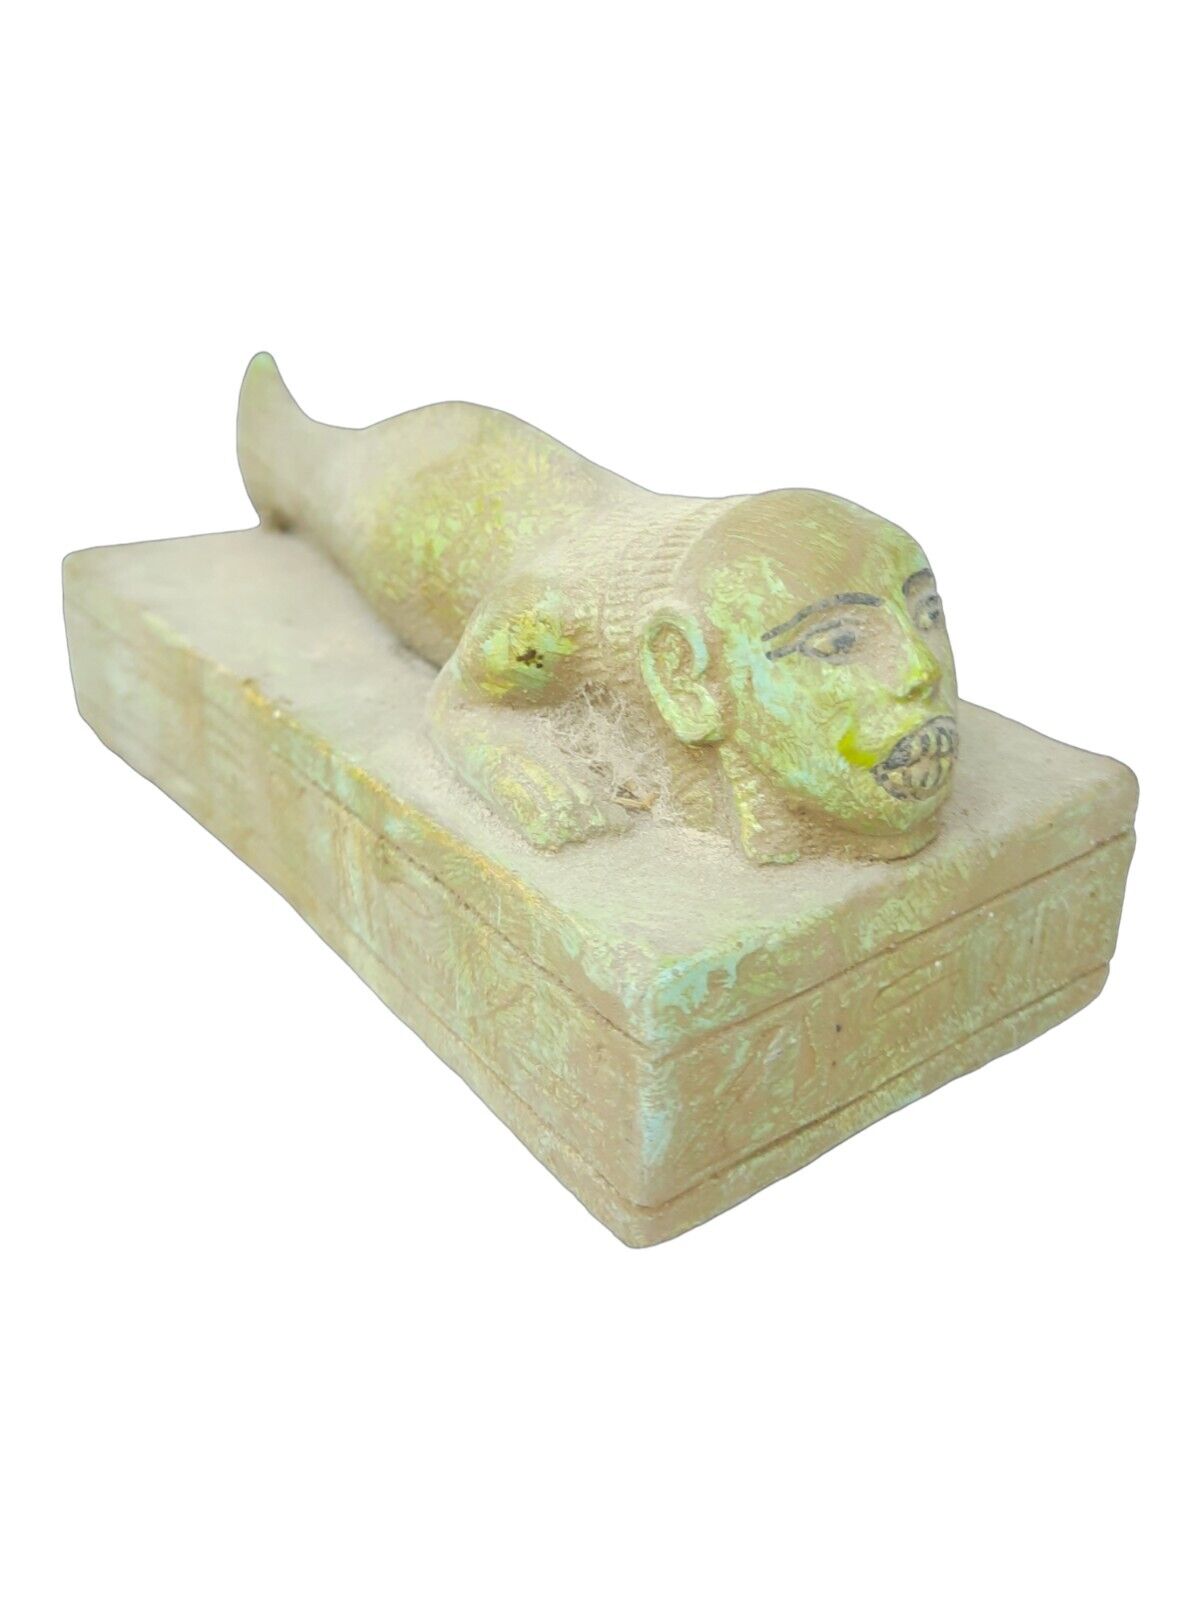 UNIQUE ANTIQUE ANCIENT EGYPTIAN Statue Stone Seth with Head Fish